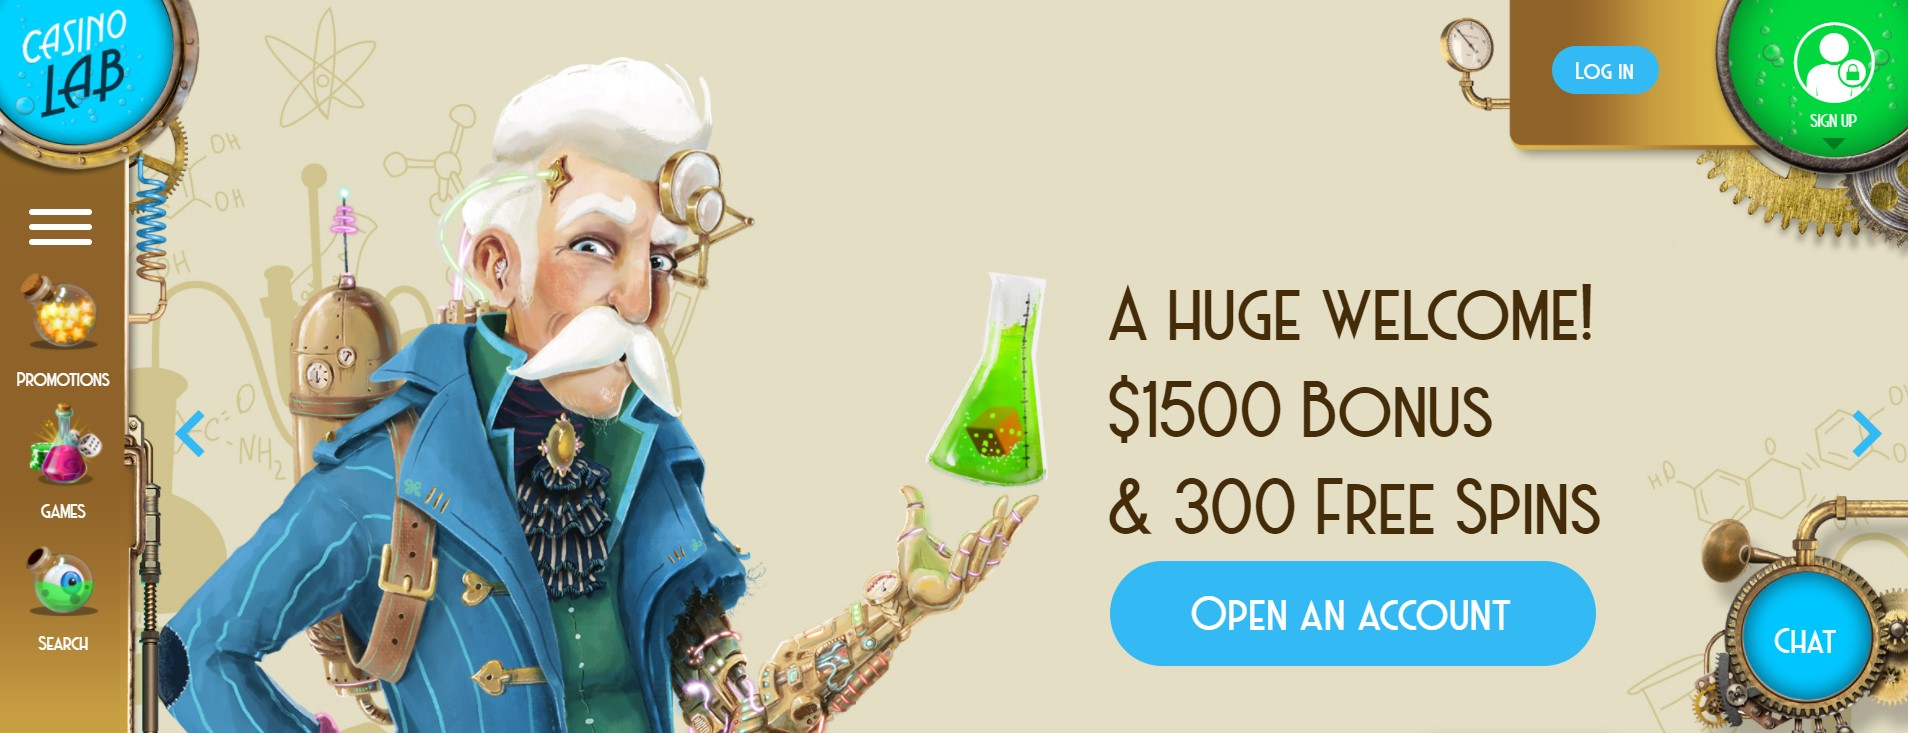 Casino Lab Welcome offer